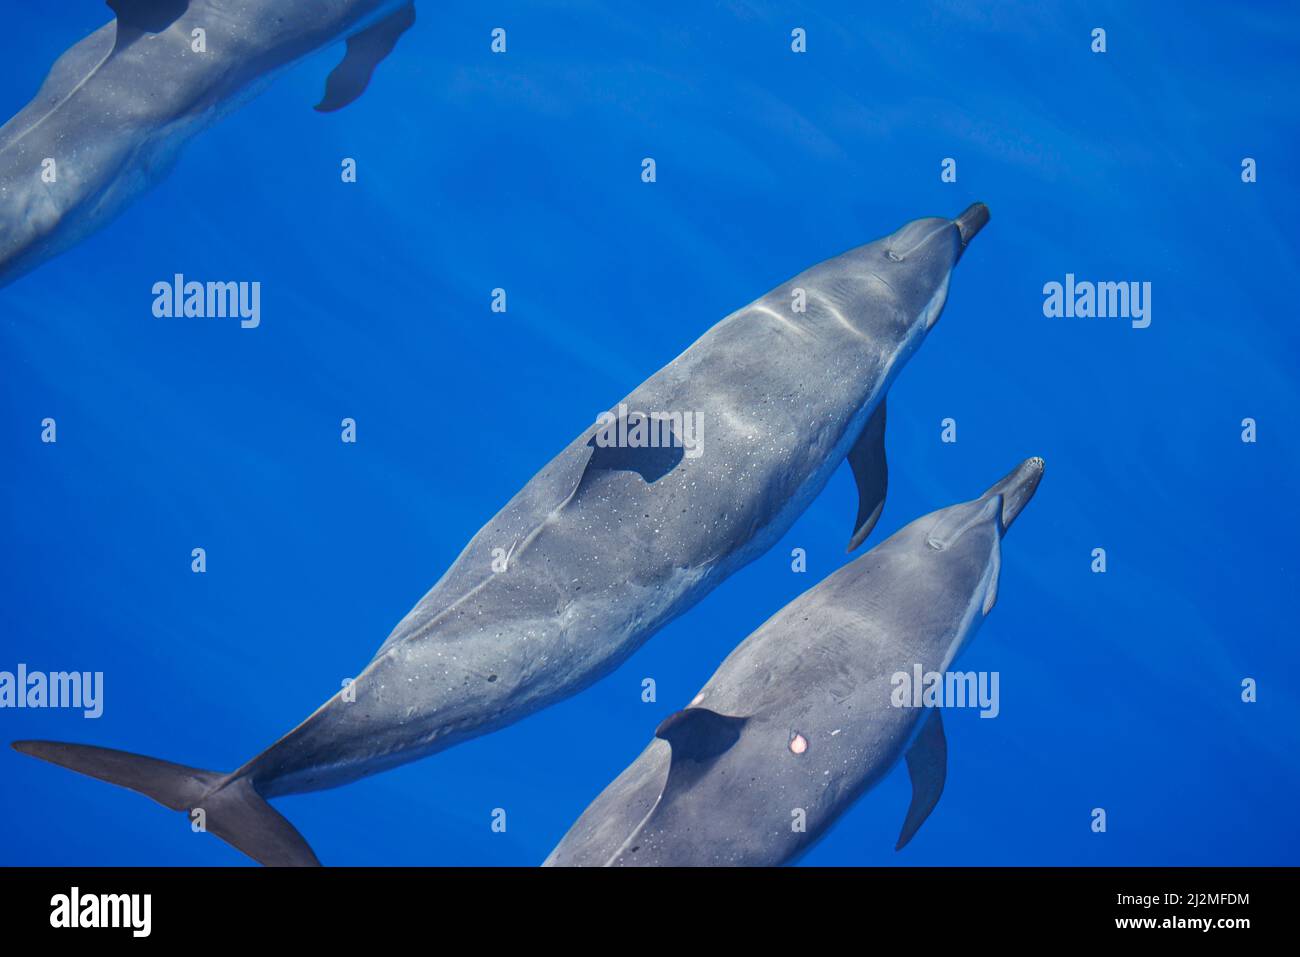 Pantropical spotted dolphins, Stenella attenuata, in open ocean, Hawaii, Pacific Ocean, United States. The dolphin at the bottom has two wounds on eit Stock Photo